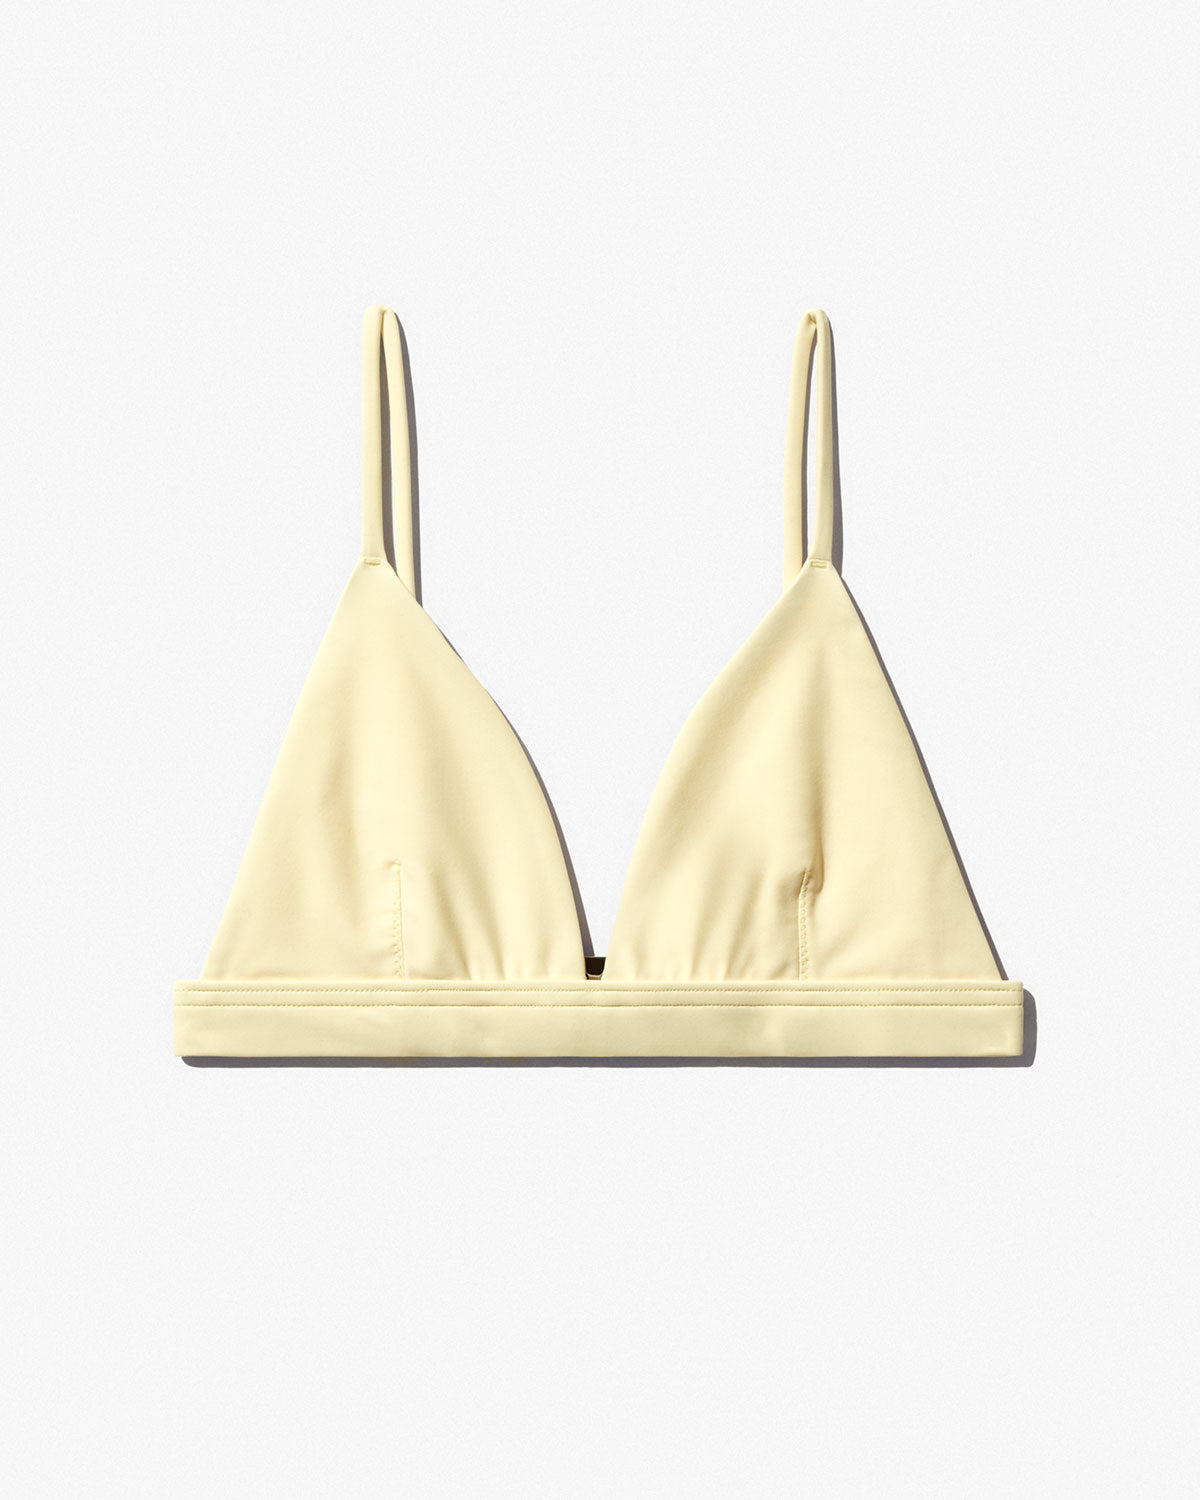 Cou Cou Intimates The Triangle Bralette